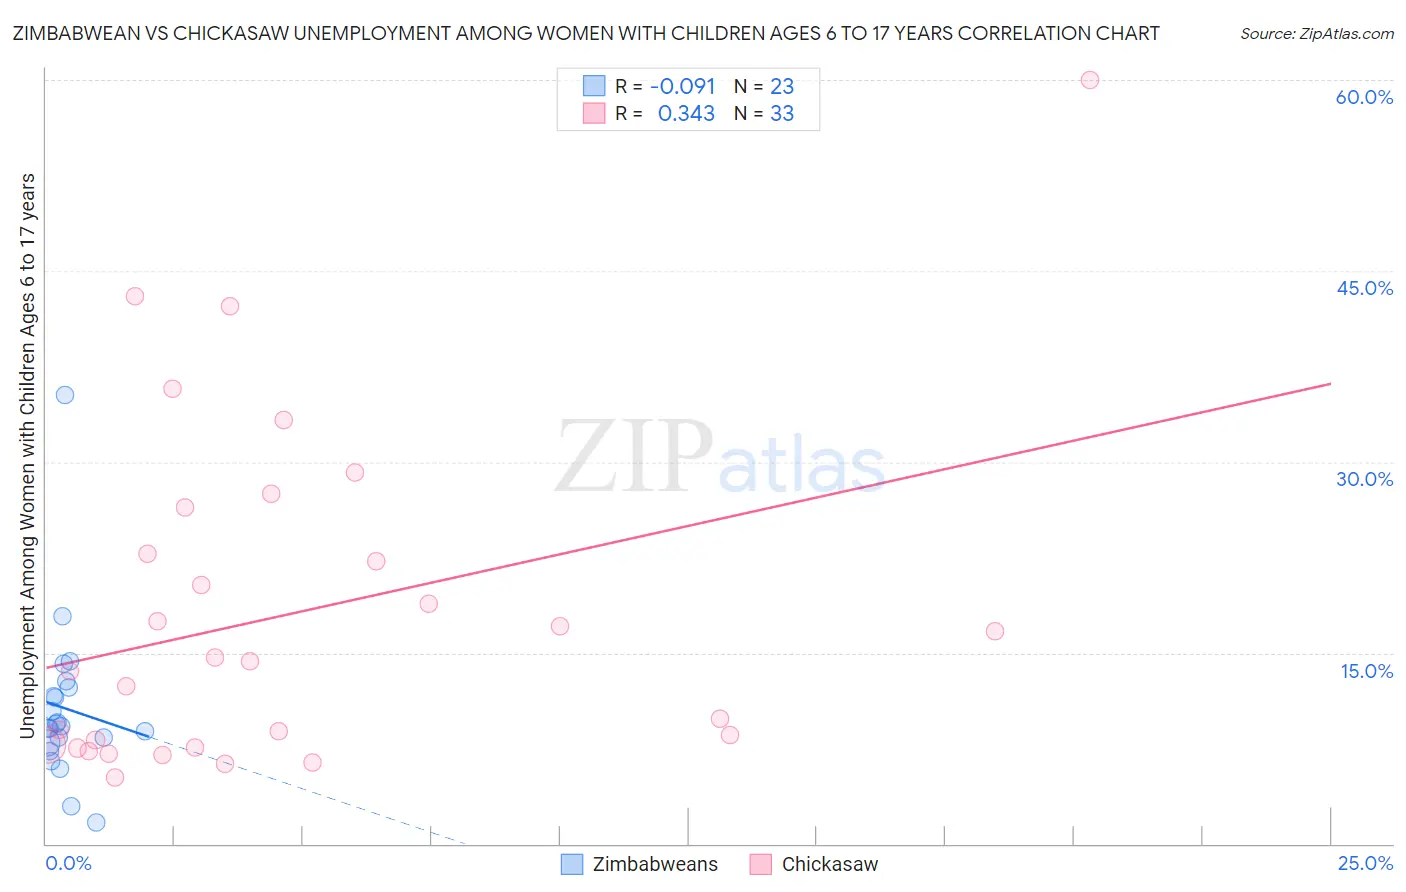 Zimbabwean vs Chickasaw Unemployment Among Women with Children Ages 6 to 17 years